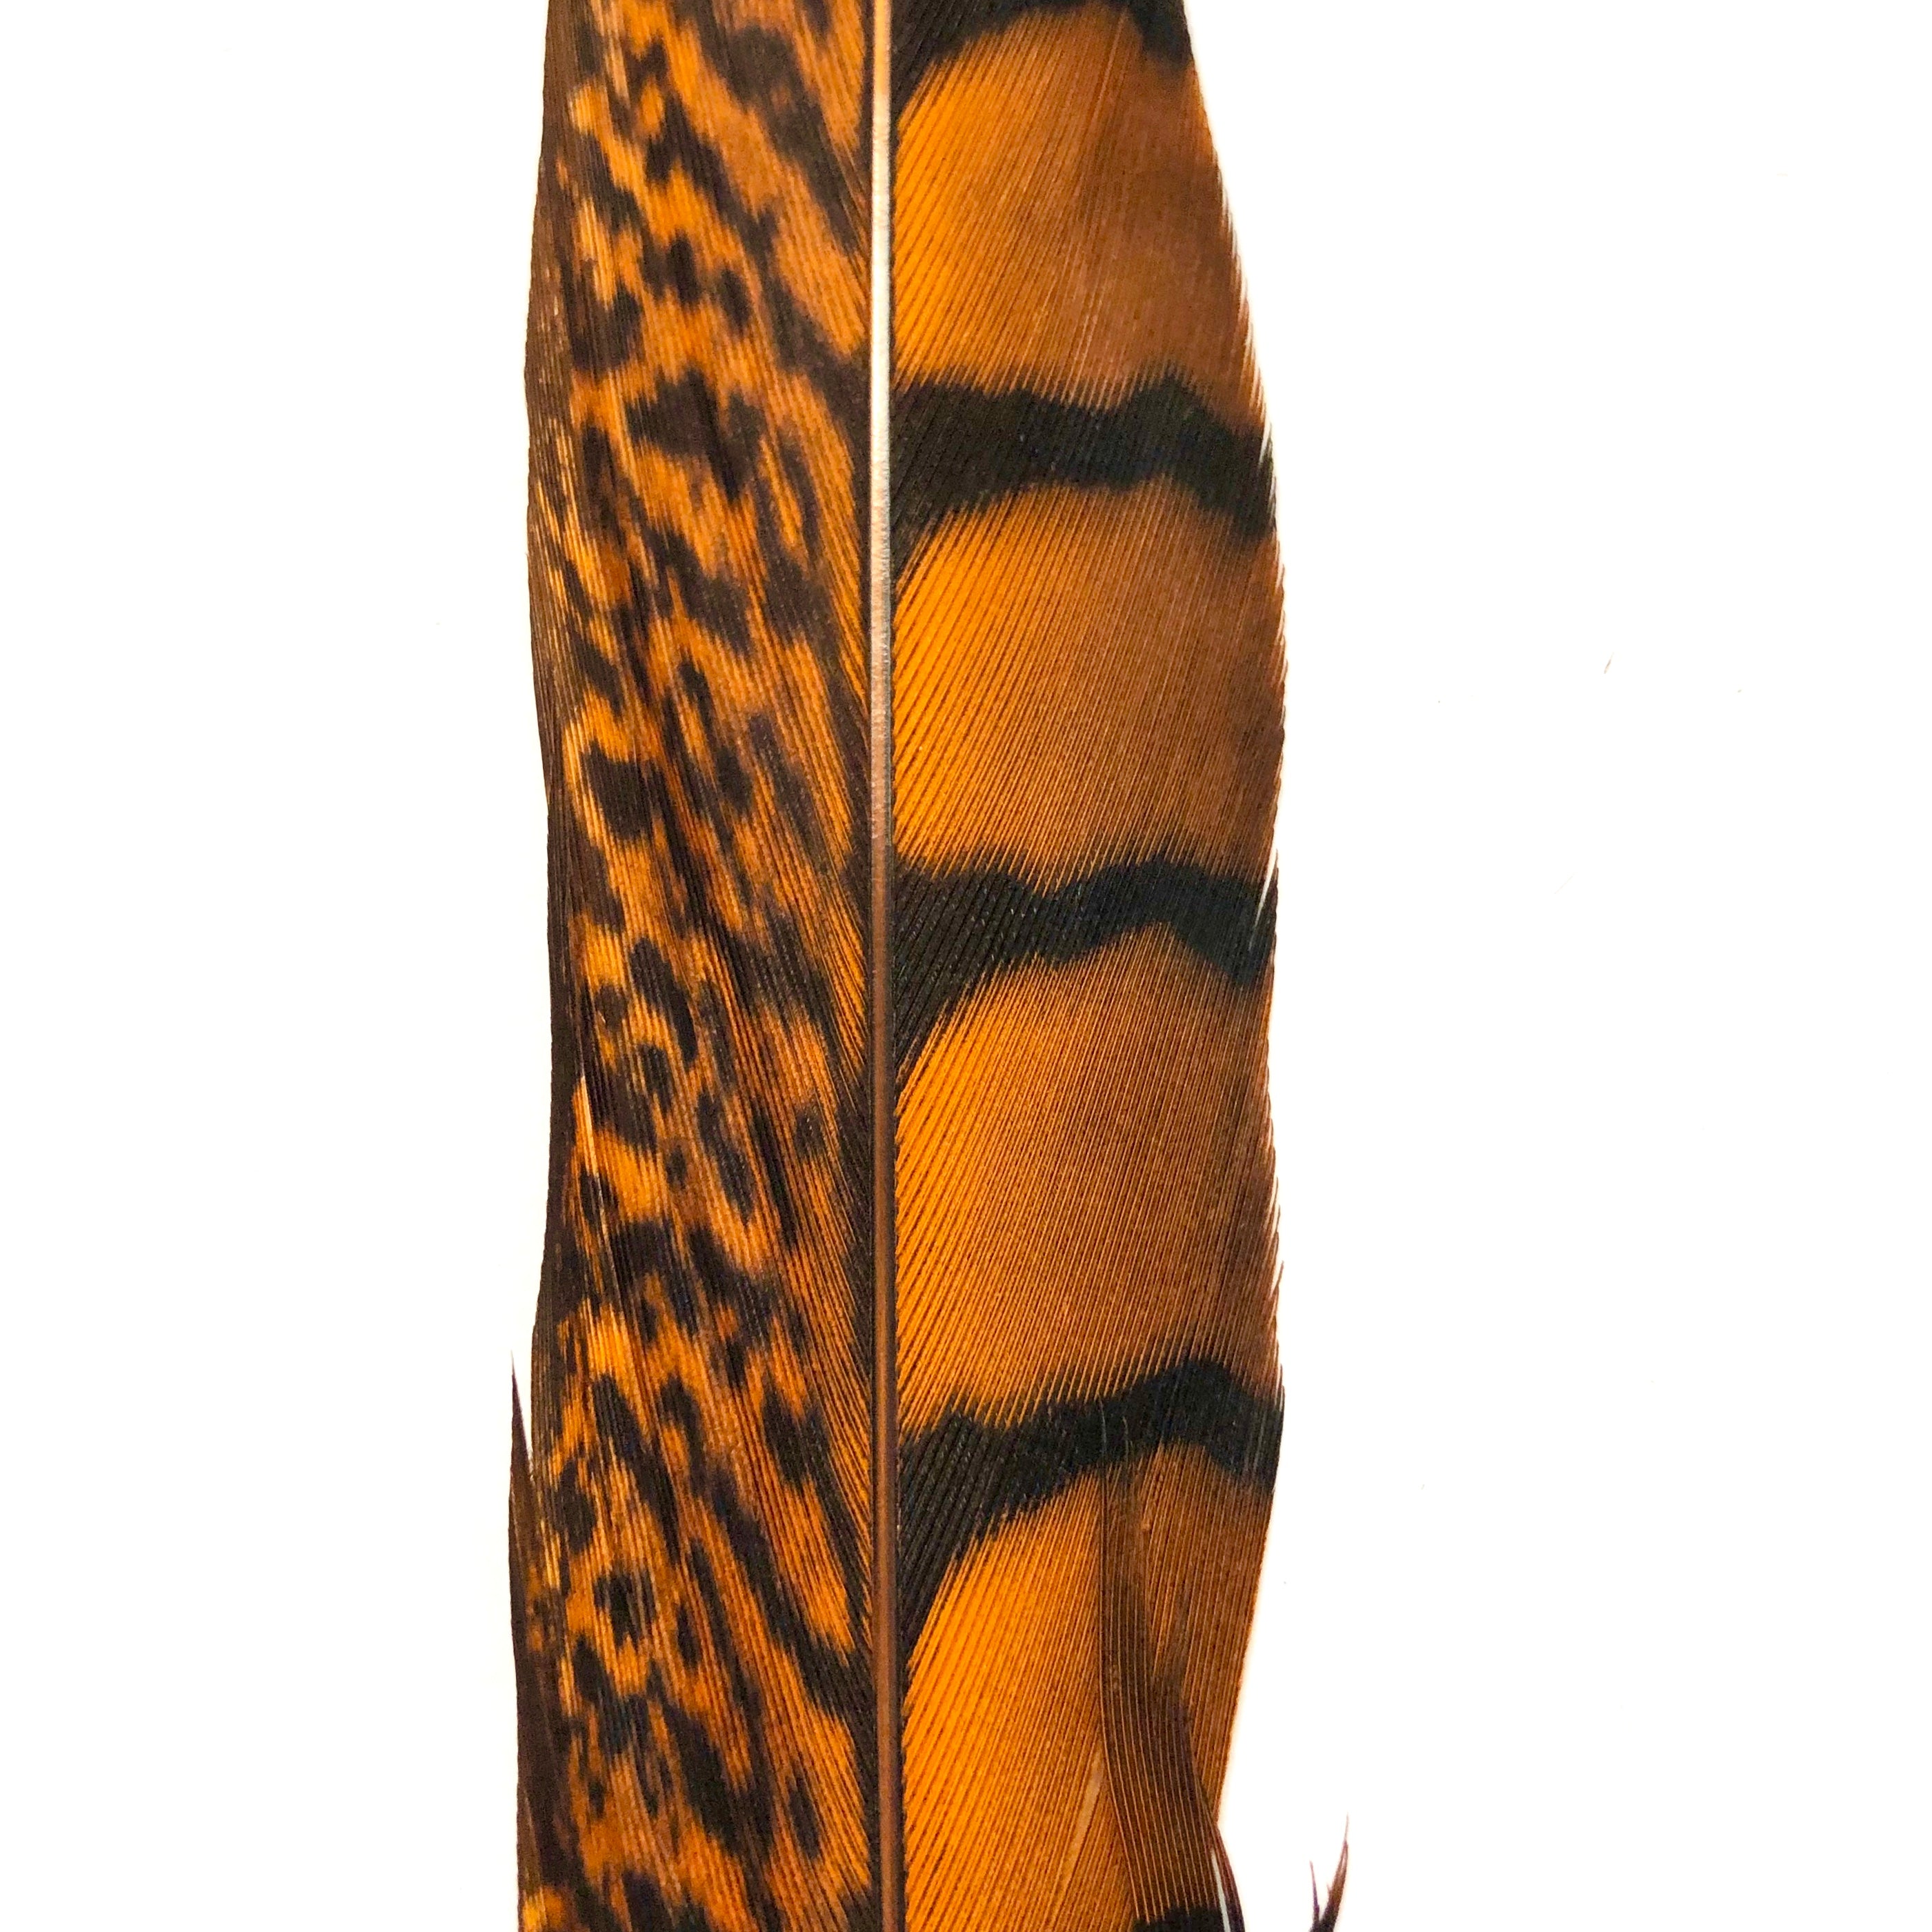 20" to 30" Lady Amherst Pheasant Side Tail Feather - Orange